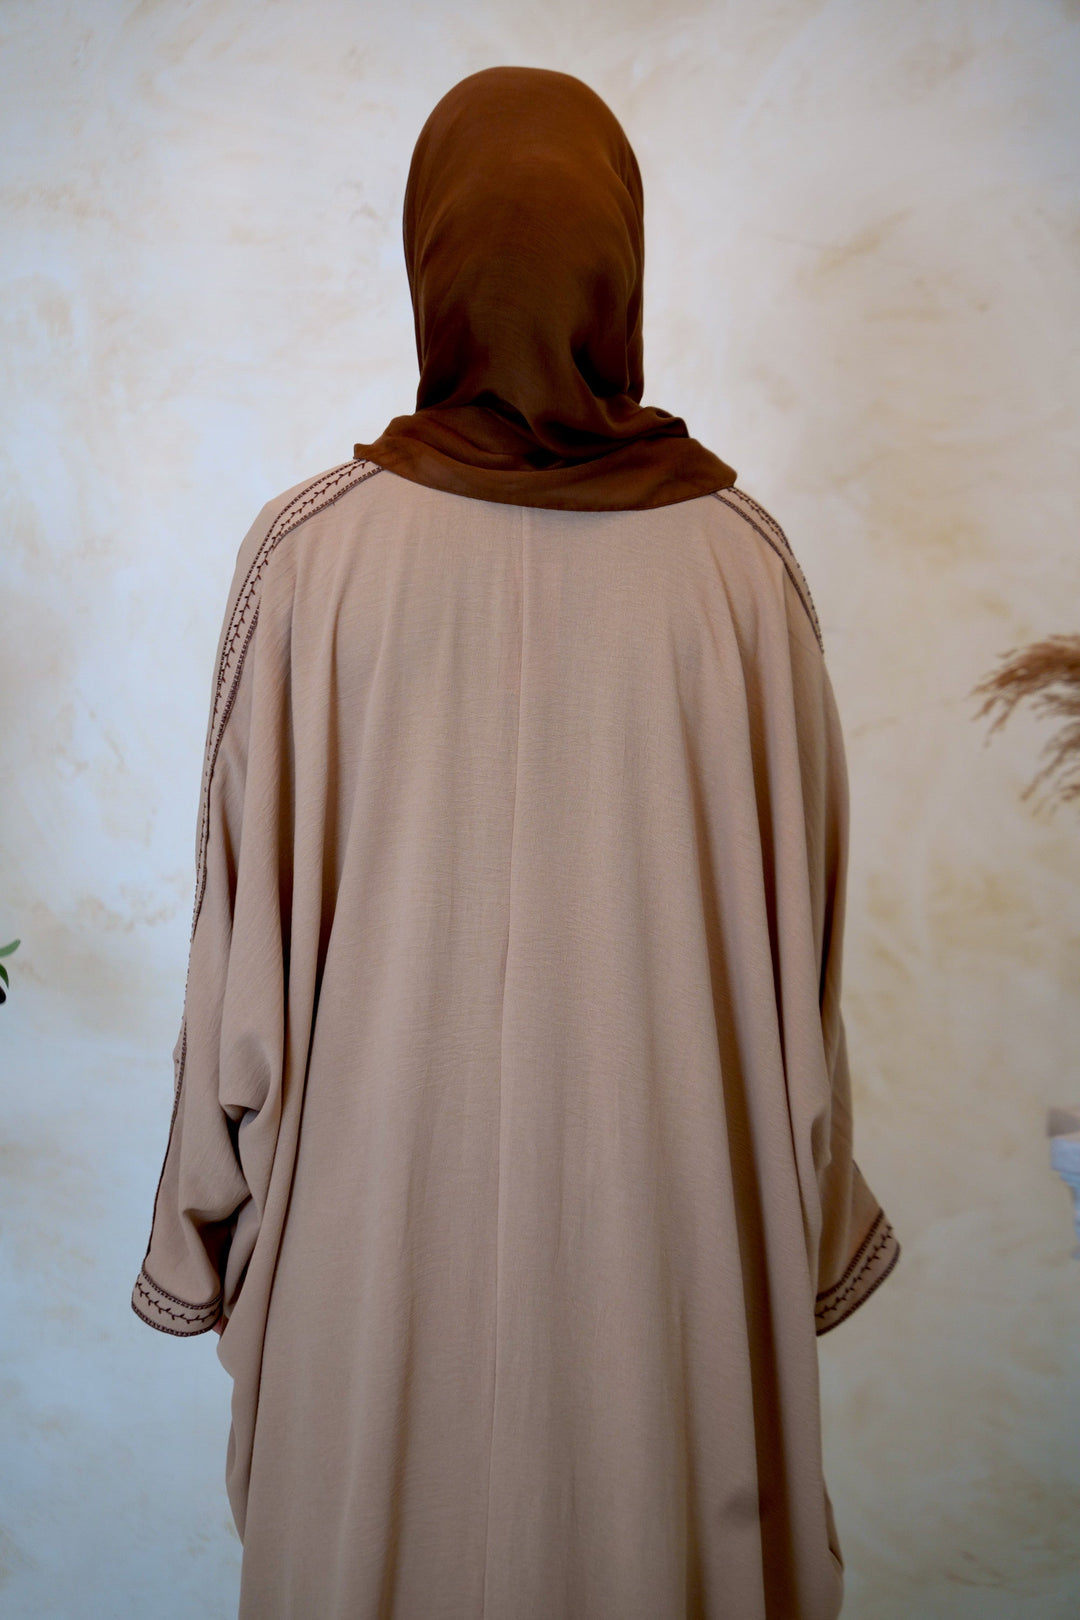 a woman wearing a brown shawl standing in front of a wall